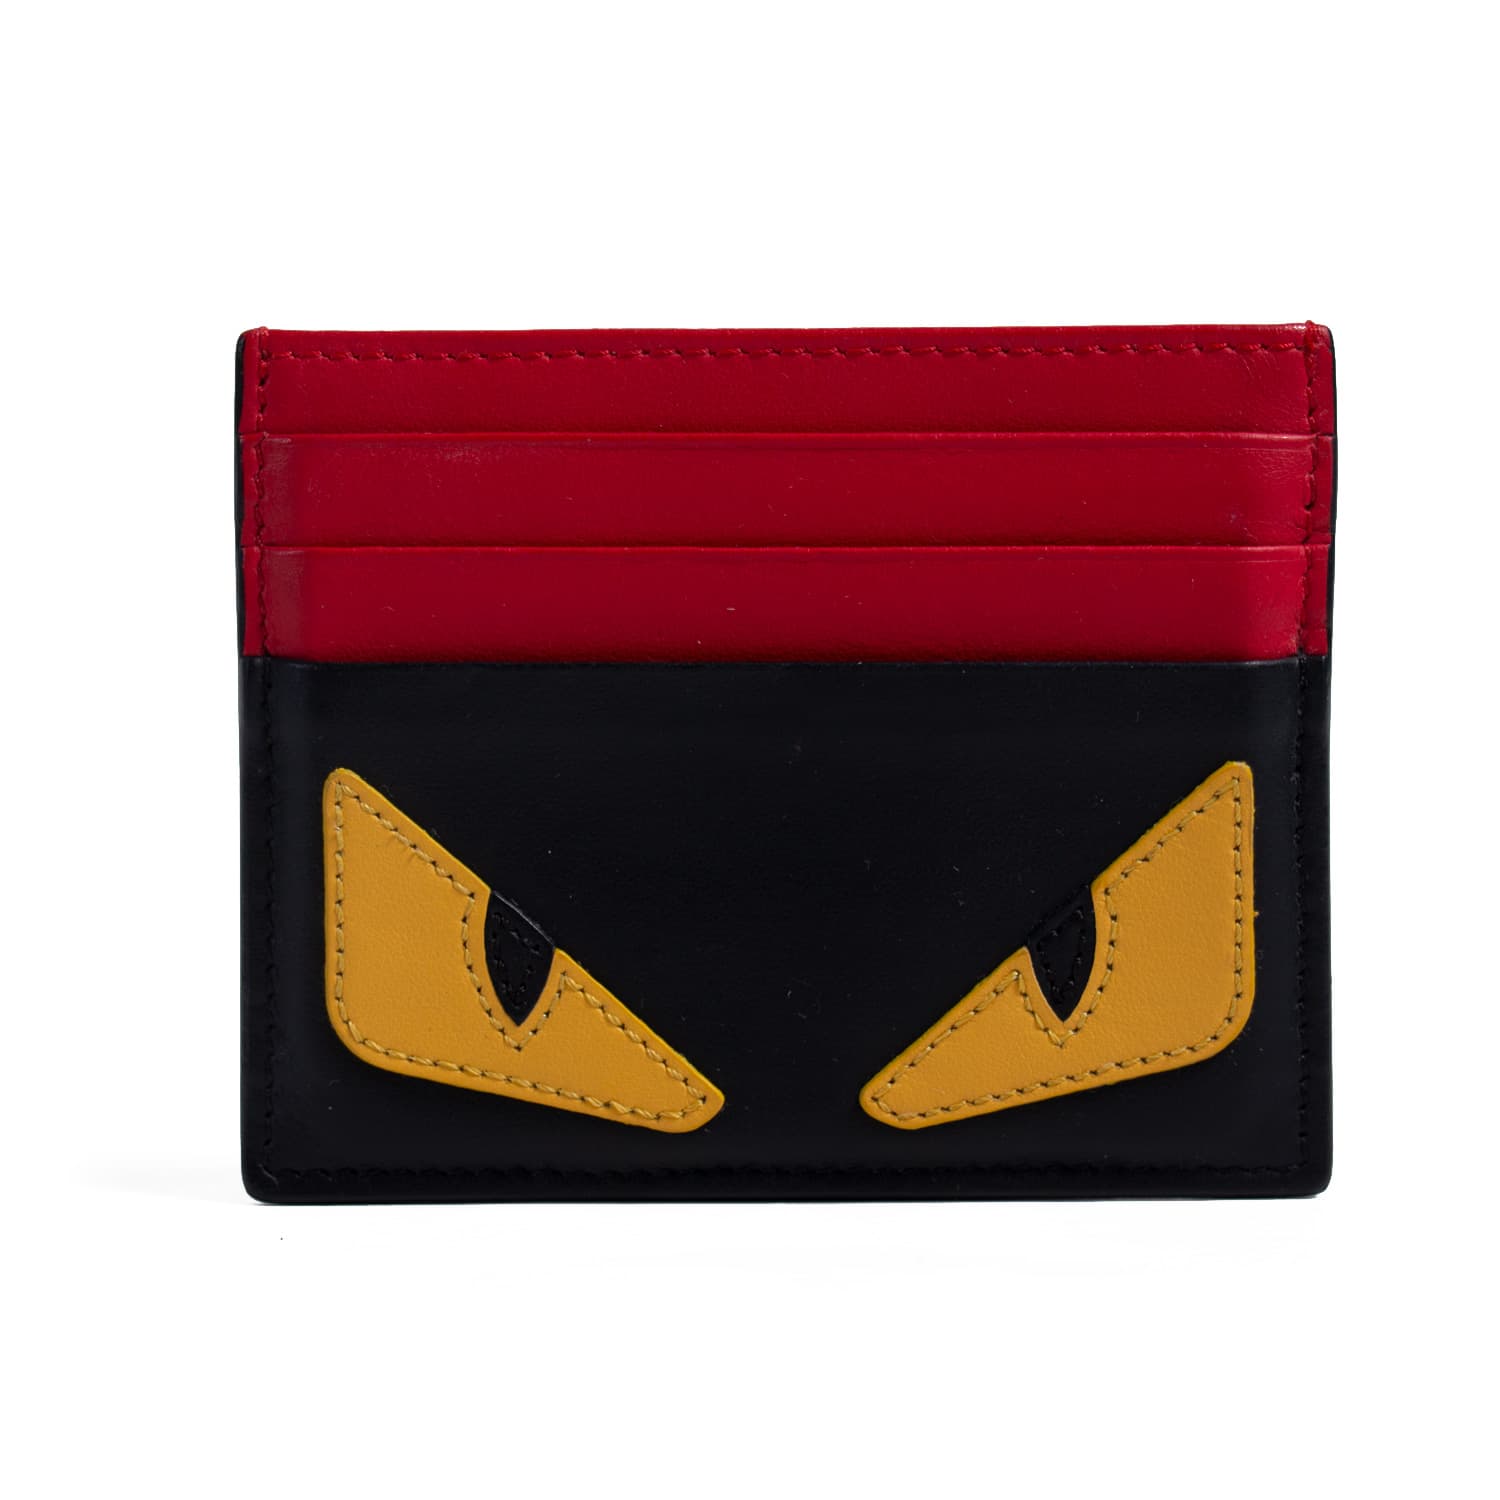 Shop authentic Fendi Monster Leather Card Holder at revogue for just ...